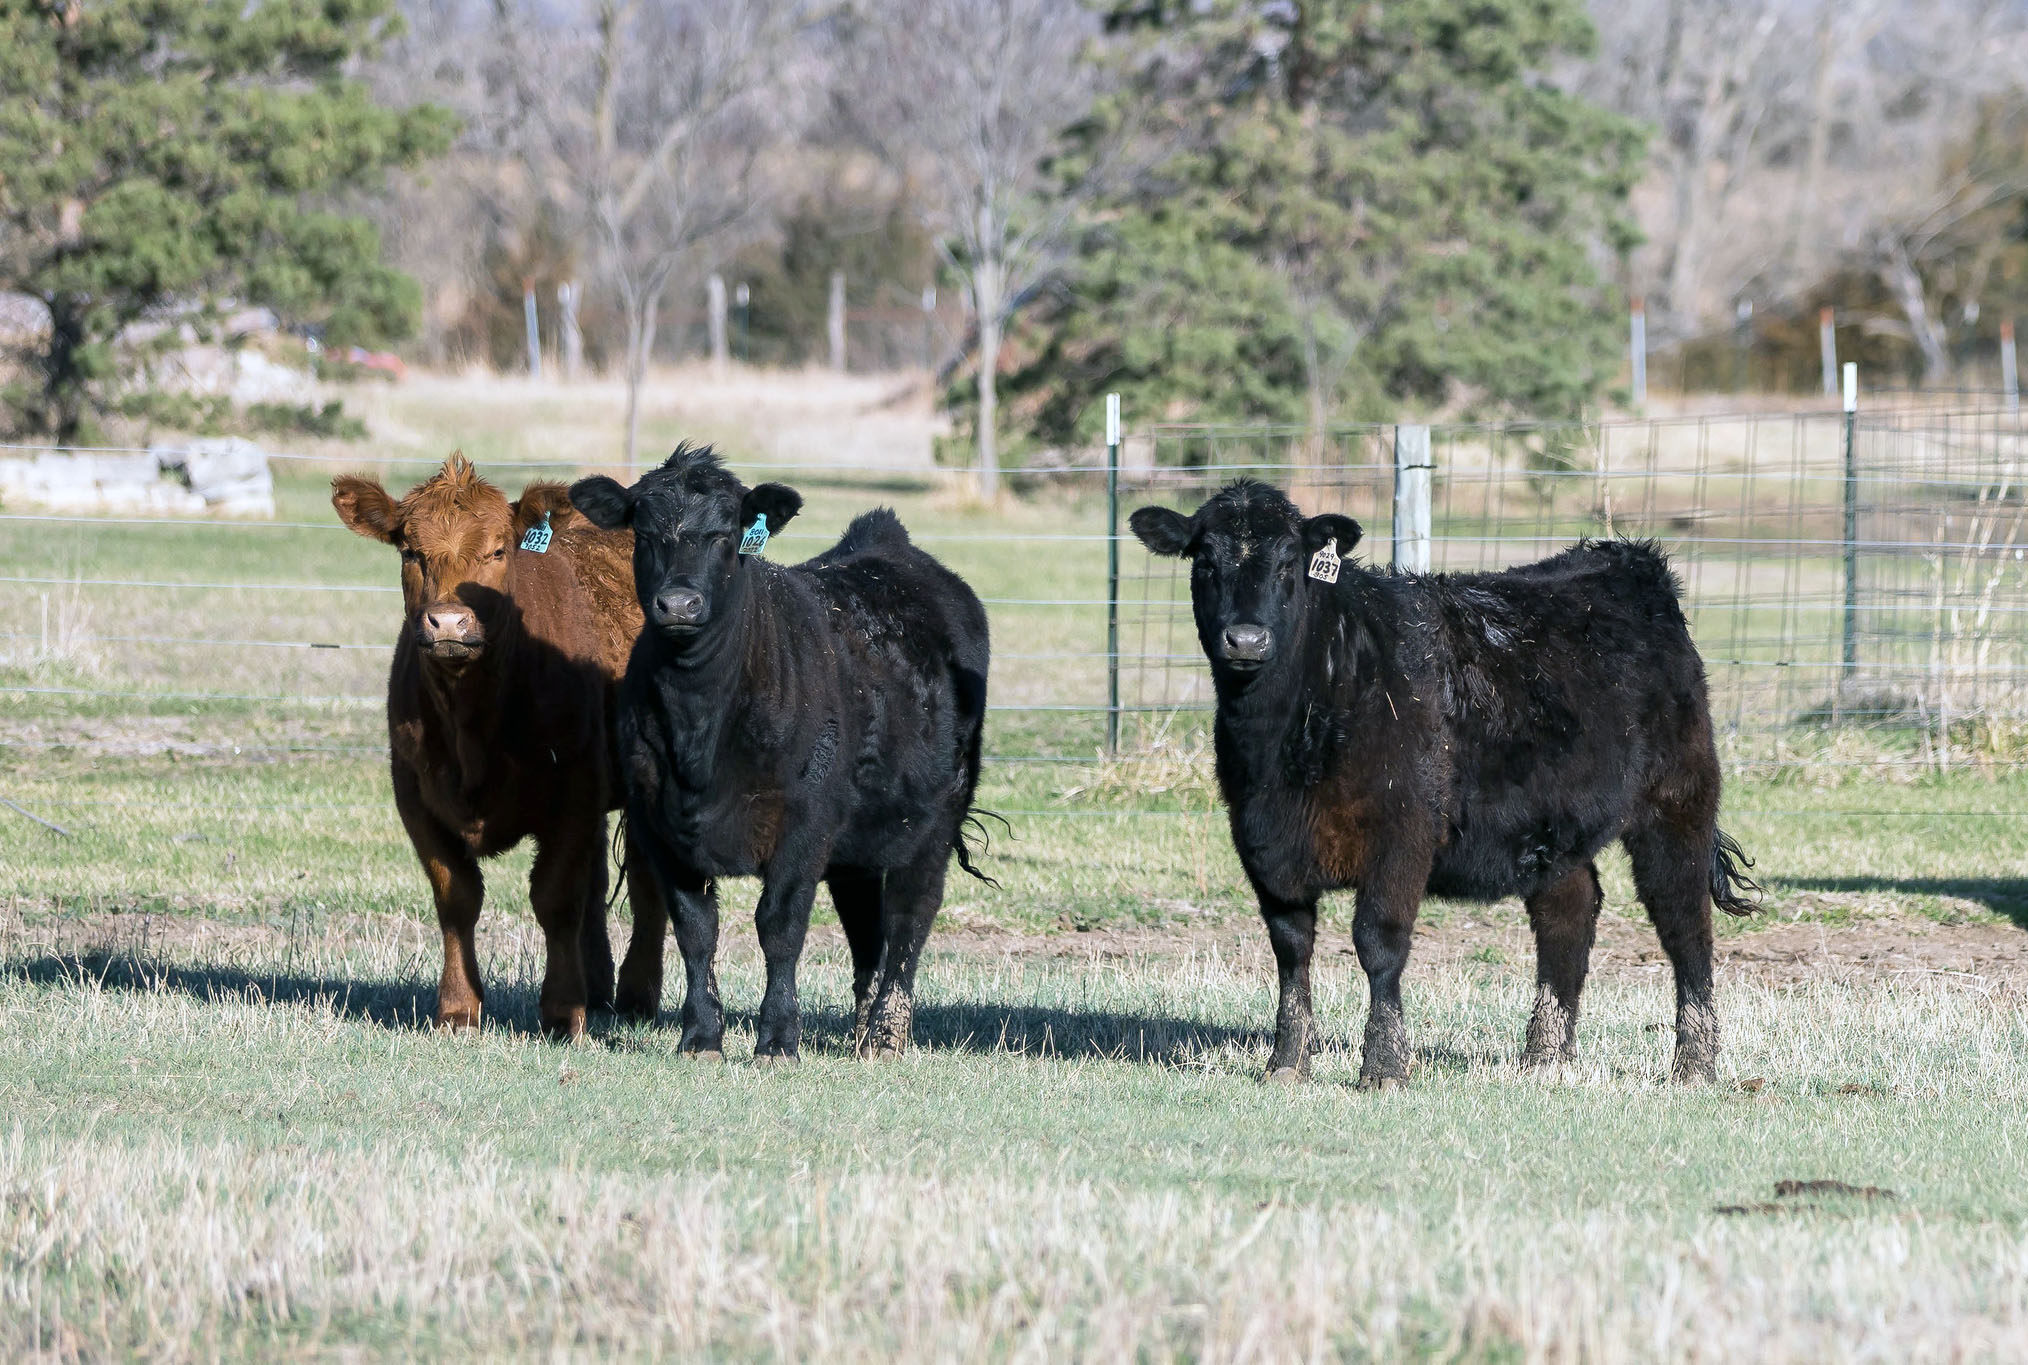 Cows need to be monitored for calving-related issues, according to veterinarians at K-State’s Beef Cattle Institute. (Photo: K-State Research and Extension)